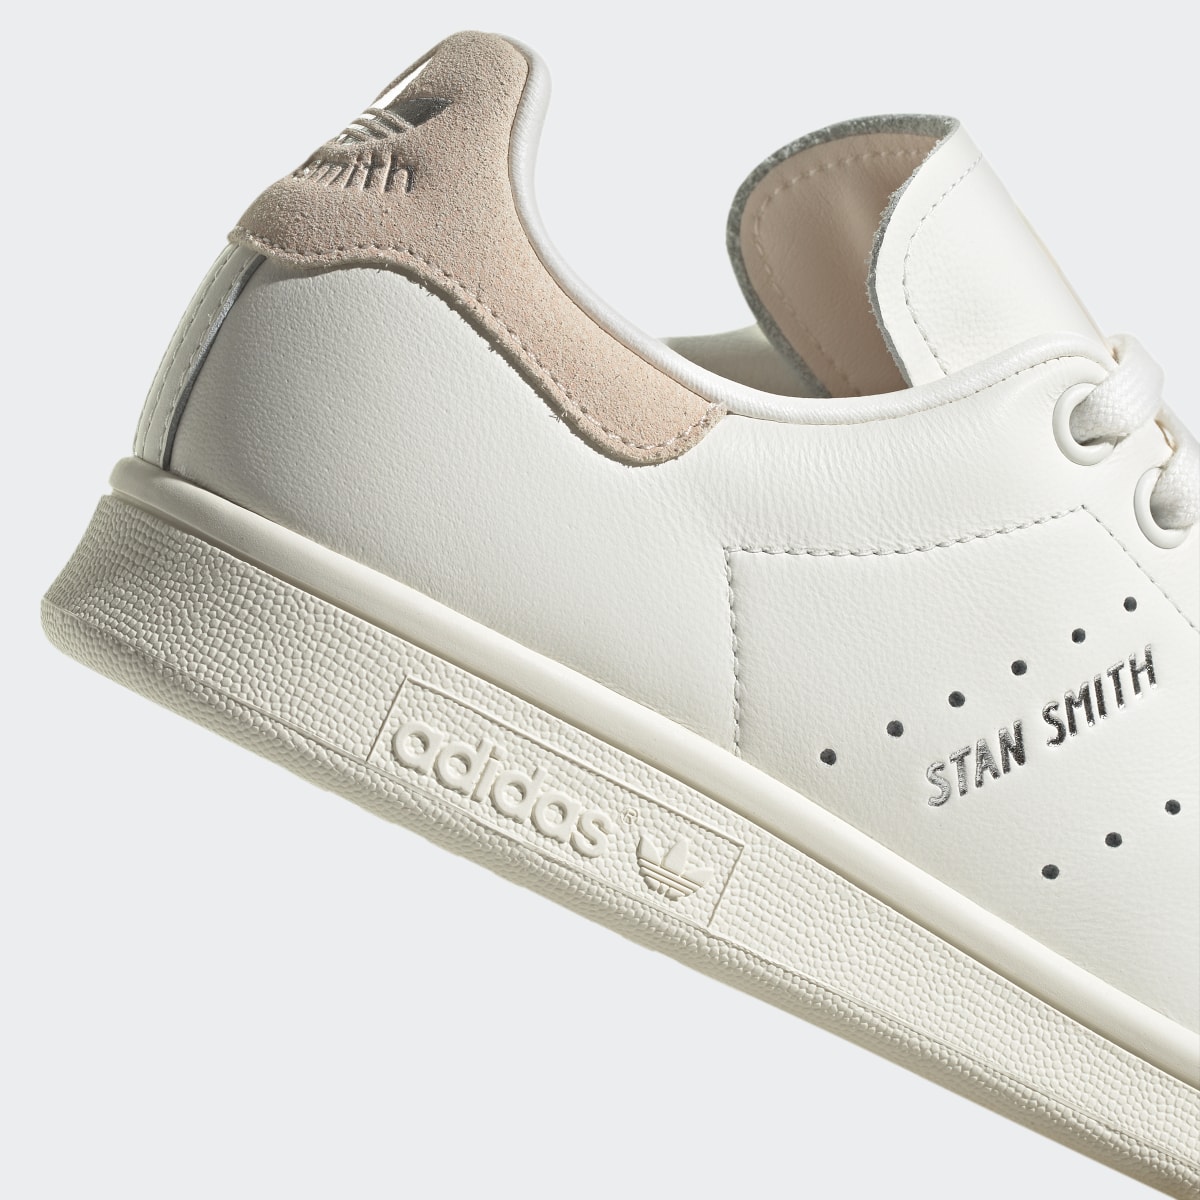 Adidas Stan Smith Shoes. 9